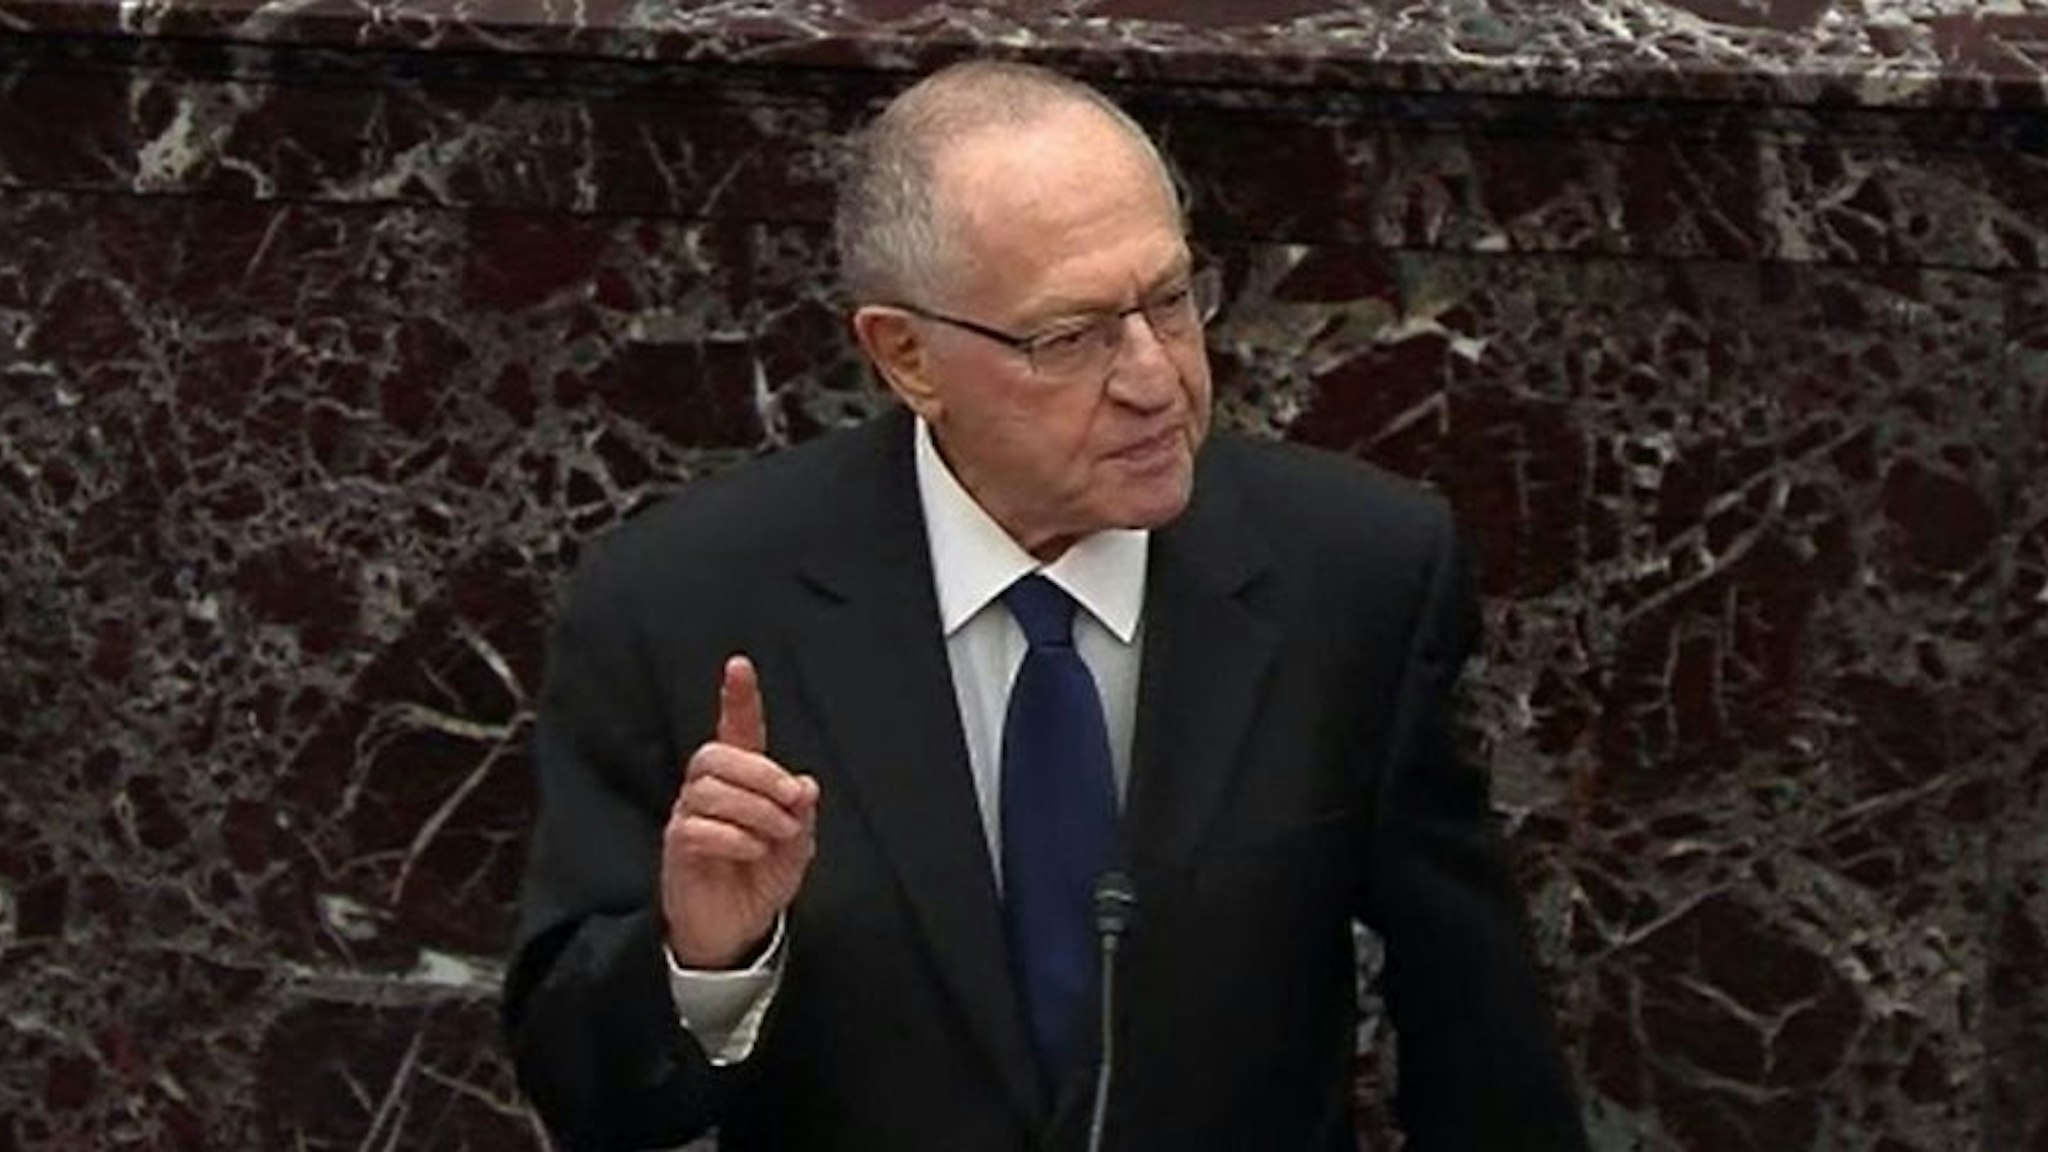 WASHINGTON, DC - JANUARY 27: In this screenshot taken from a Senate Television webcast, Legal Counsel for President Donald Trump, Alan Dershowitz speaks during impeachment proceedings against U.S. President Donald Trump in the Senate at the U.S. Capitol on January 27, 2020 in Washington, DC. Democratic House managers have concluded their opening arguments and President Trump's lawyers now continue to present their defense. (Photo by